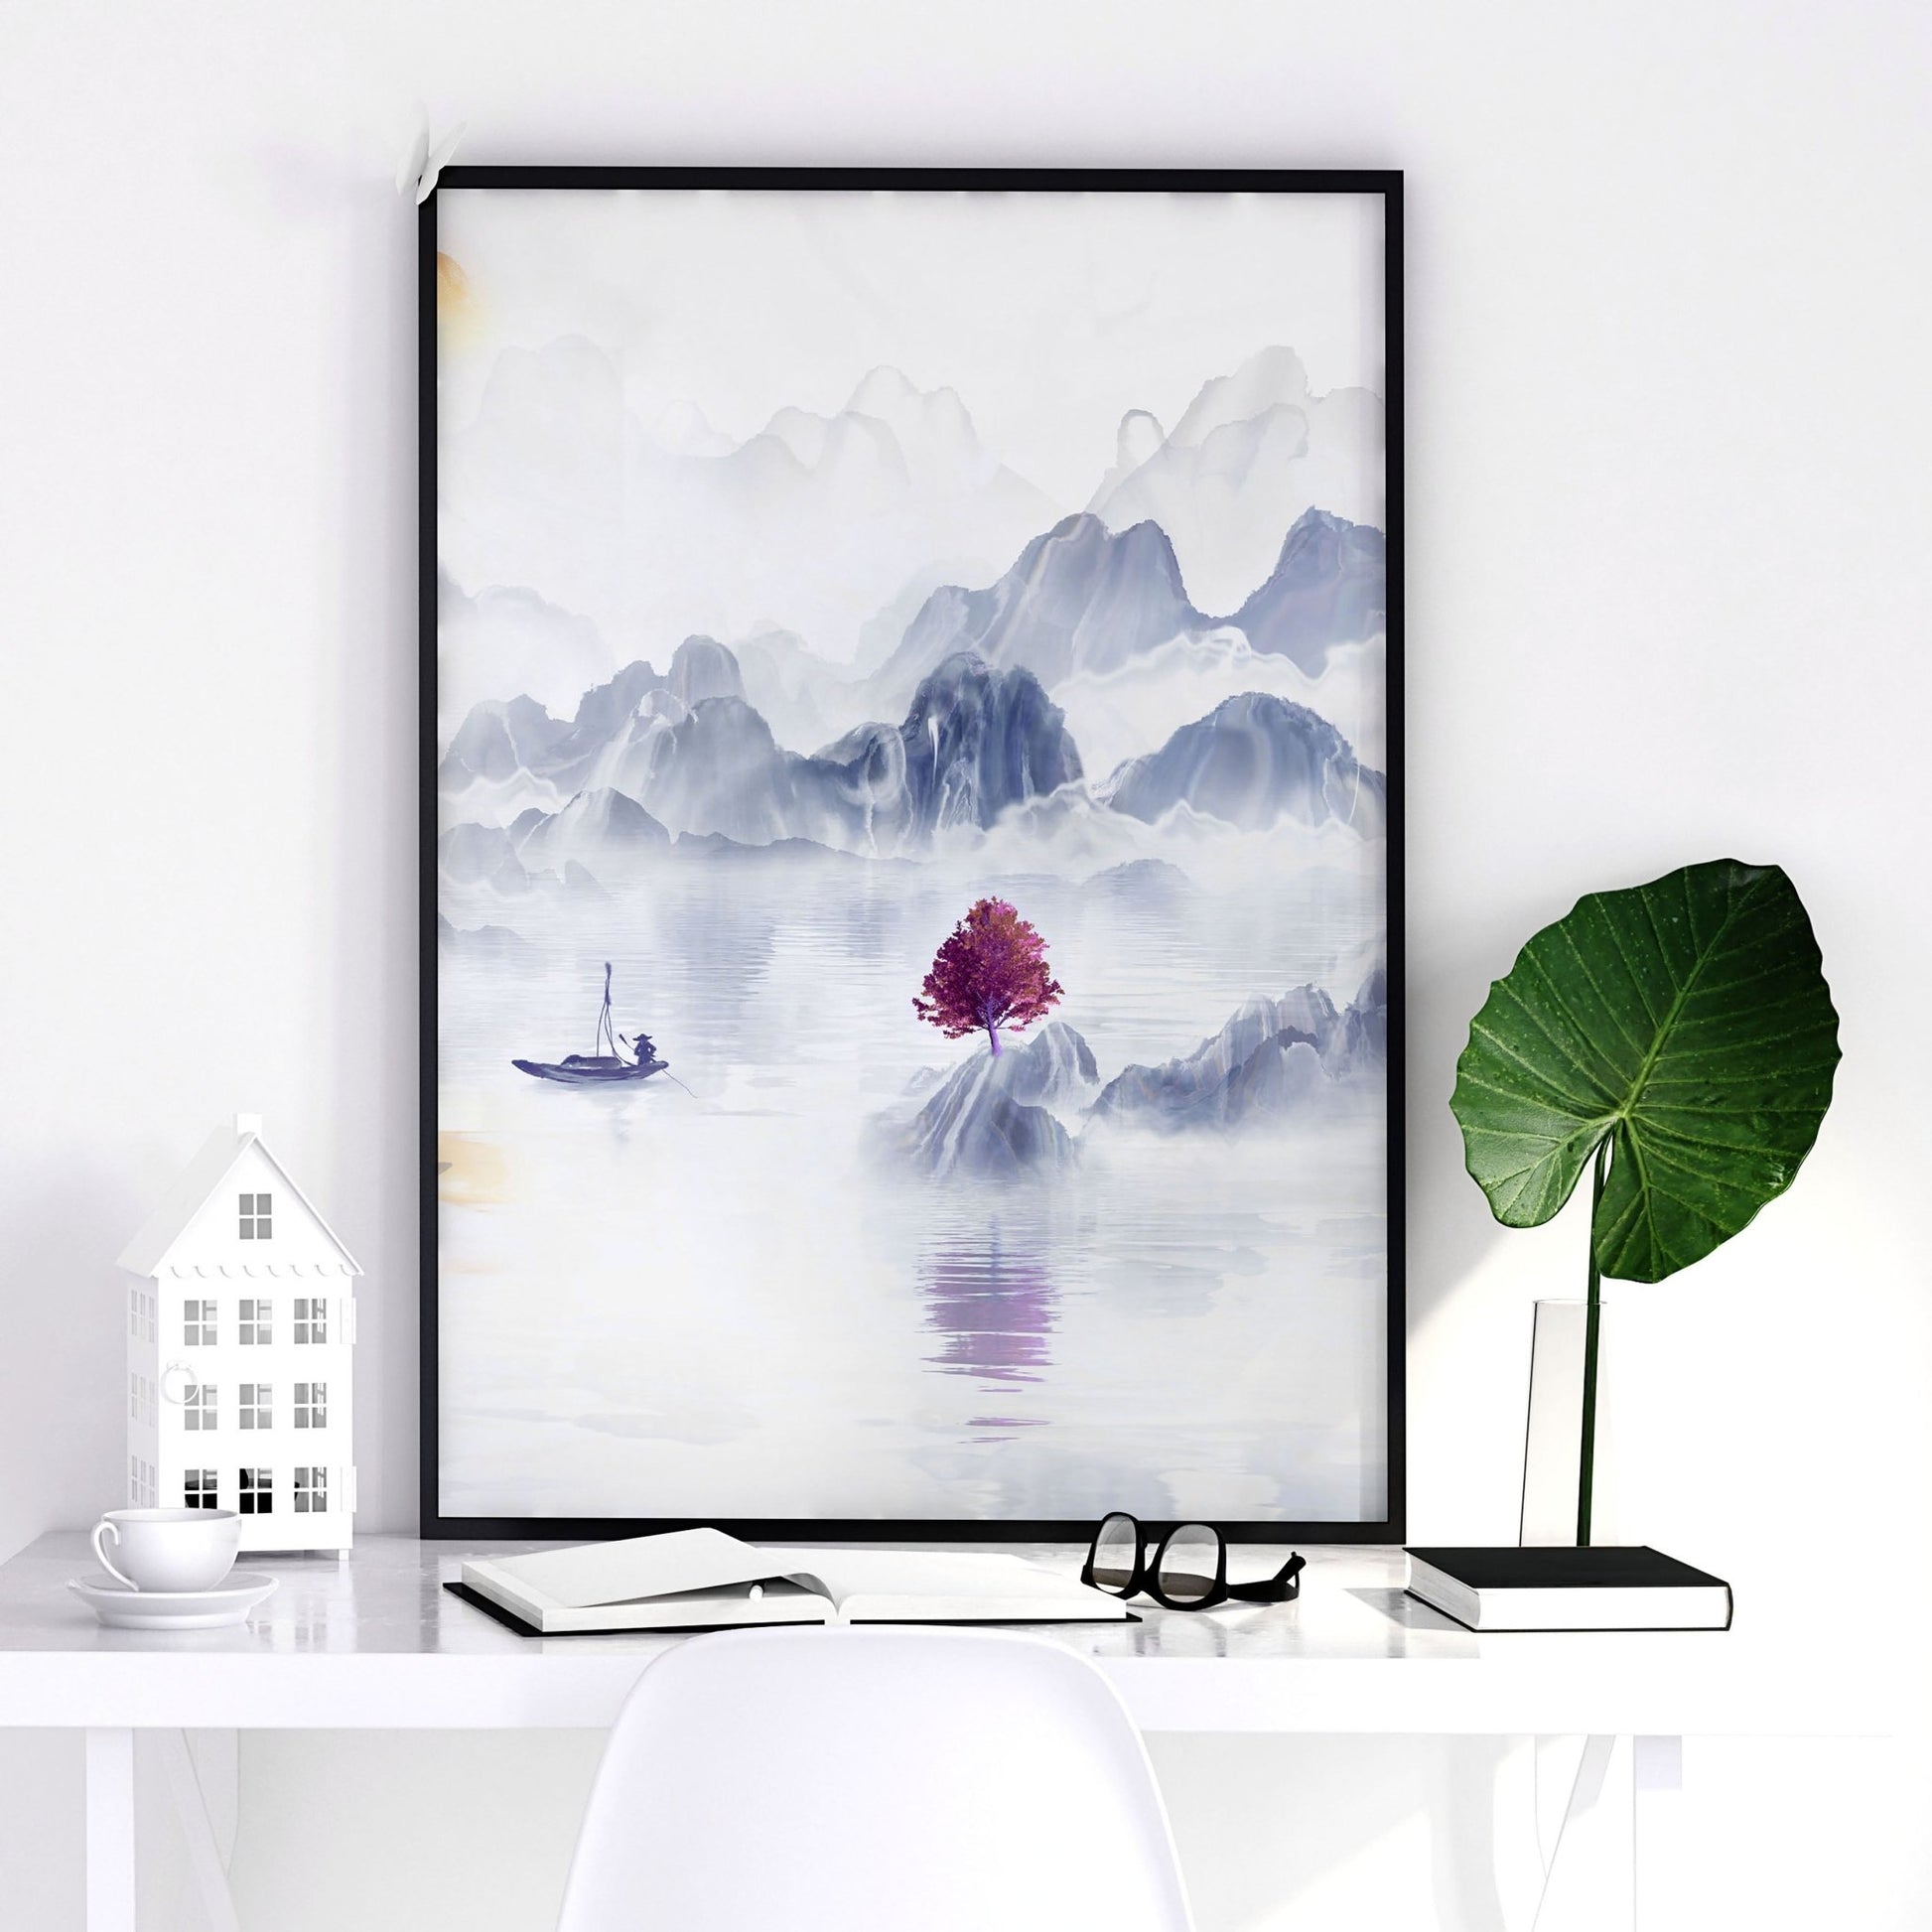 Artwork for the office | set of 3 wall art prints - About Wall Art